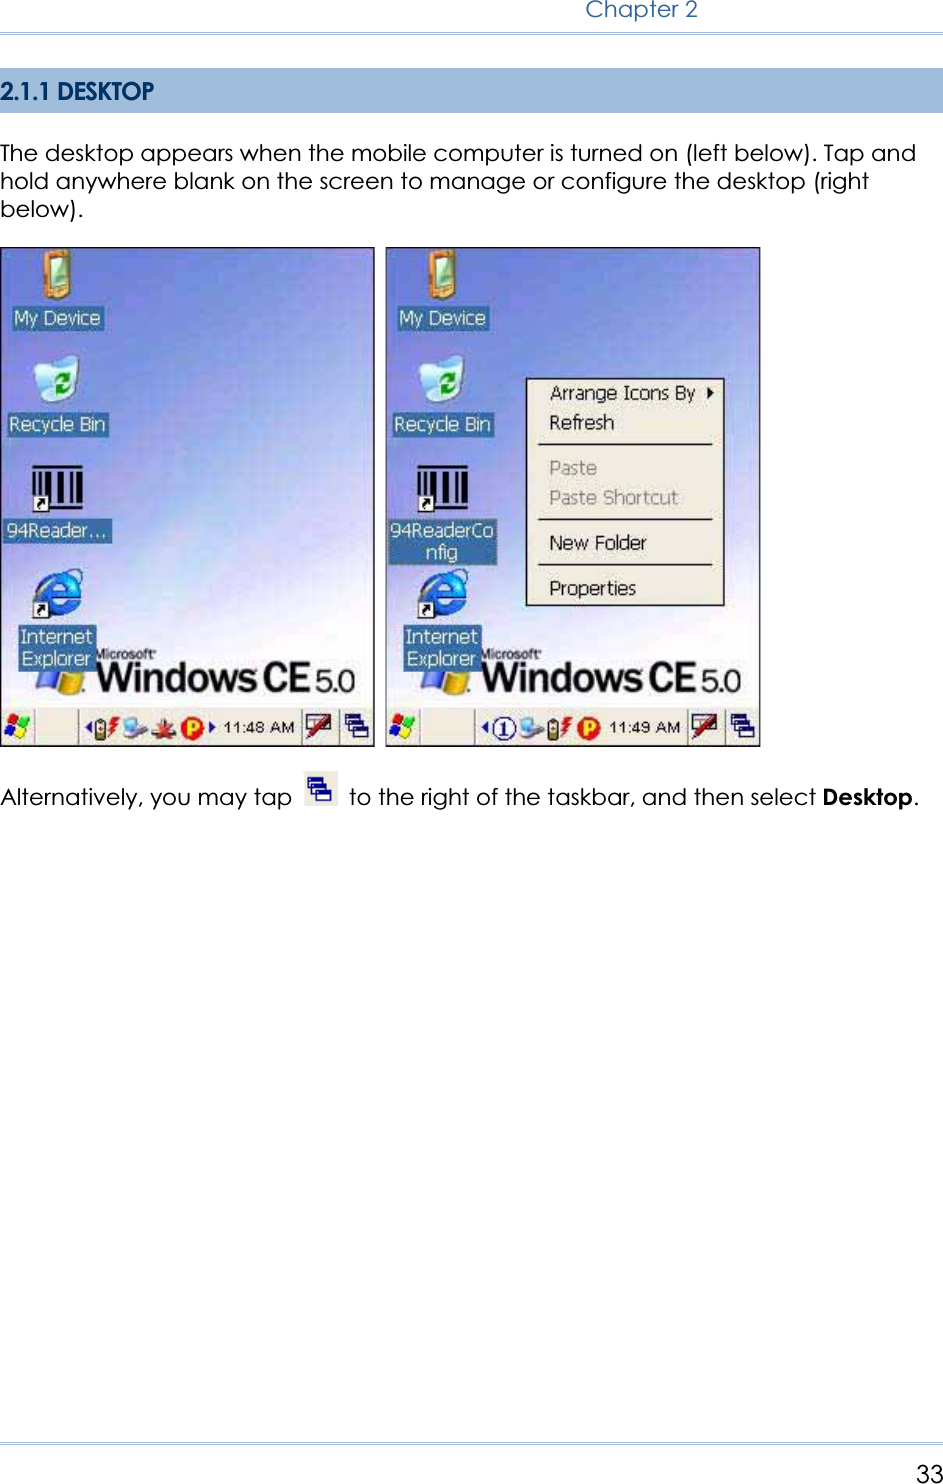 33Chapter 22.1.1 DESKTOP The desktop appears when the mobile computer is turned on (left below). Tap and hold anywhere blank on the screen to manage or configure the desktop (right below).Alternatively, you may tap    to the right of the taskbar, and then select Desktop.